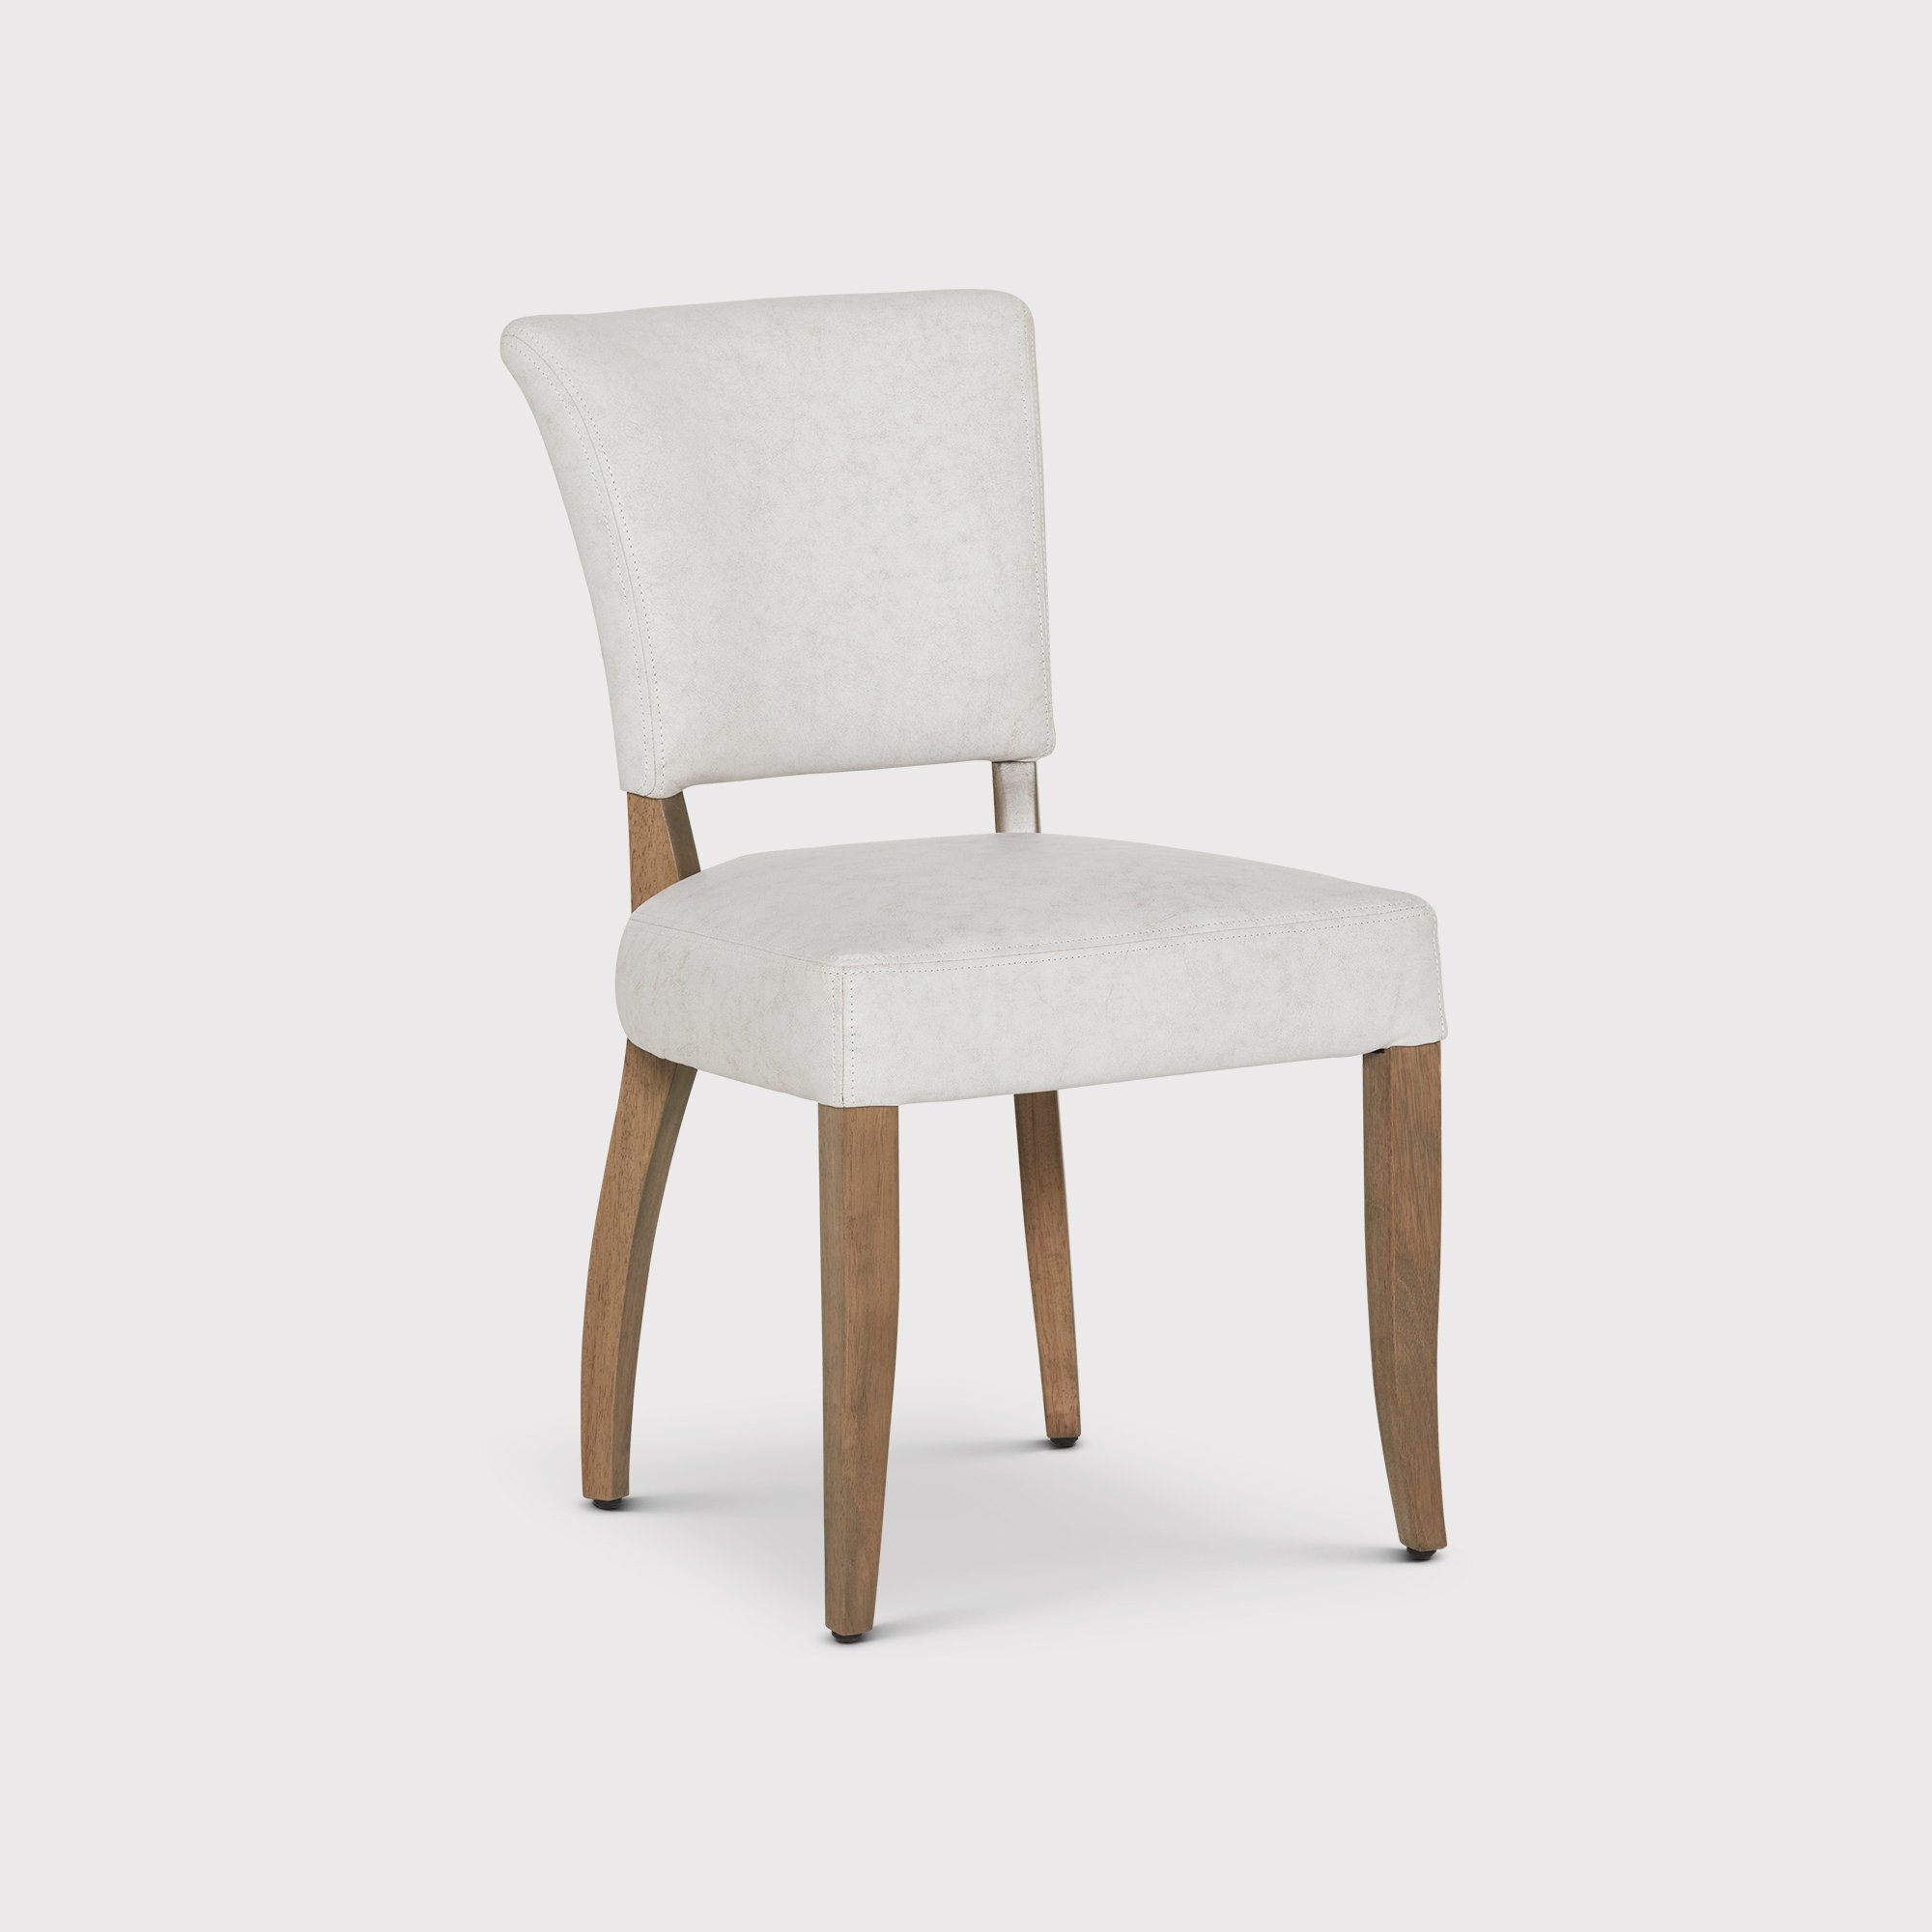 Timothy Oulton Mimi Dining Chair, White Leather | Barker & Stonehouse